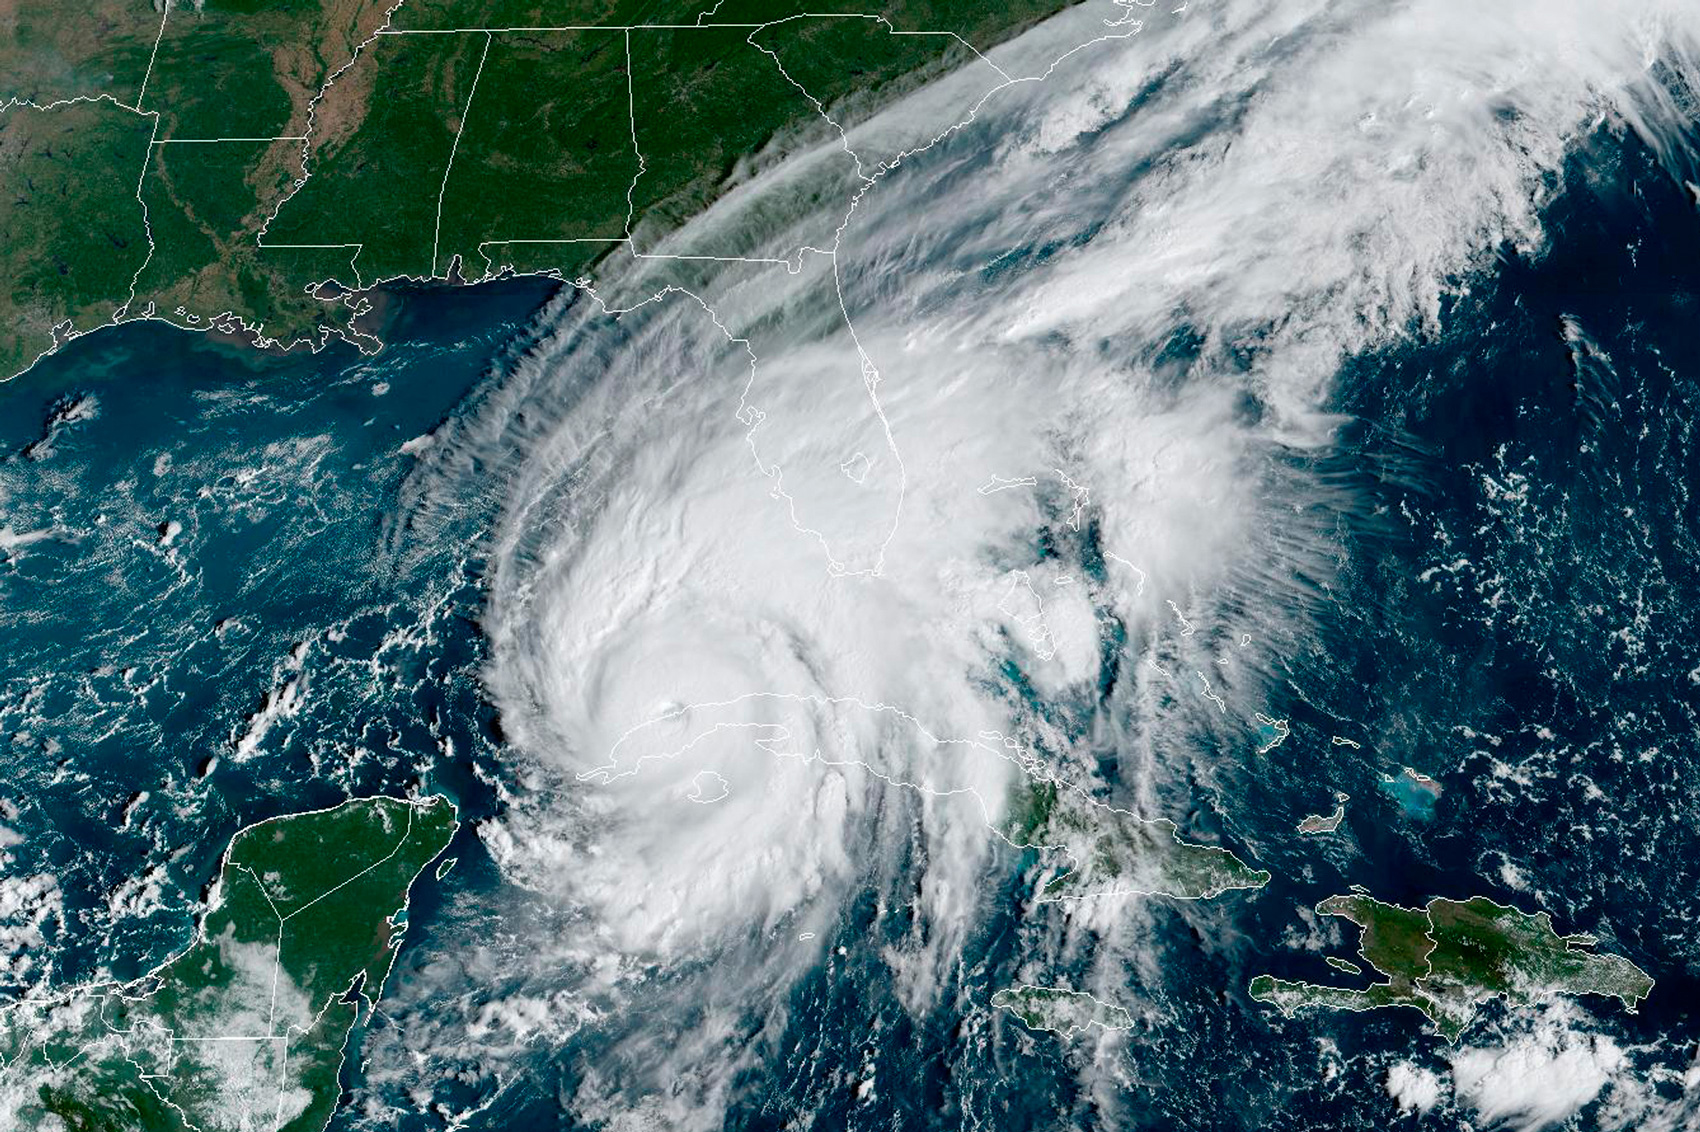 Hurricanes are difficult to track. Here's a guide on how to track storms like an expert.